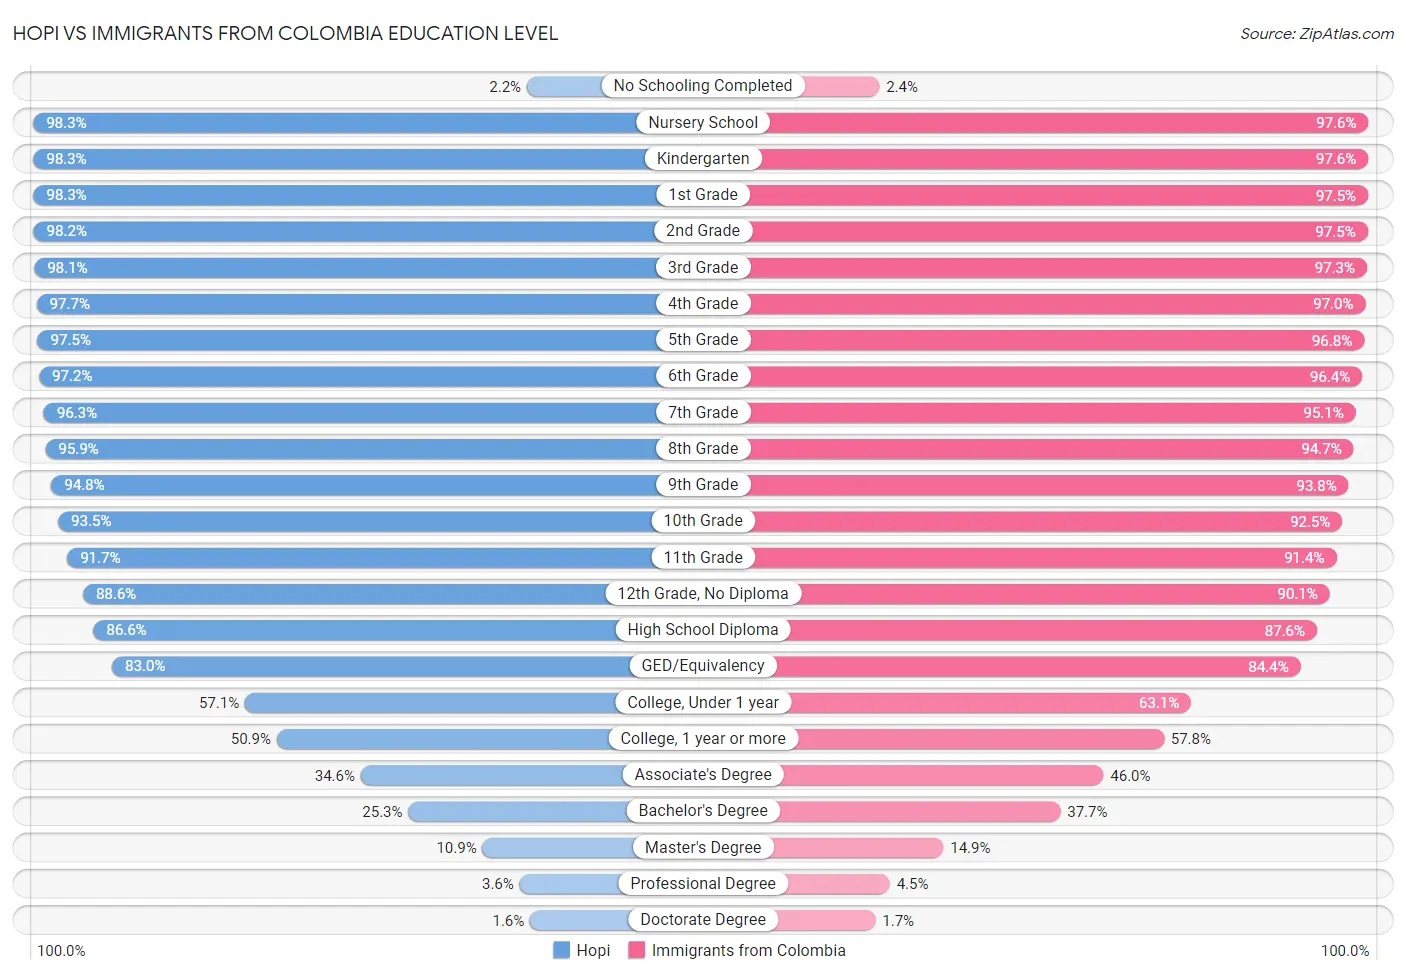 Hopi vs Immigrants from Colombia Education Level